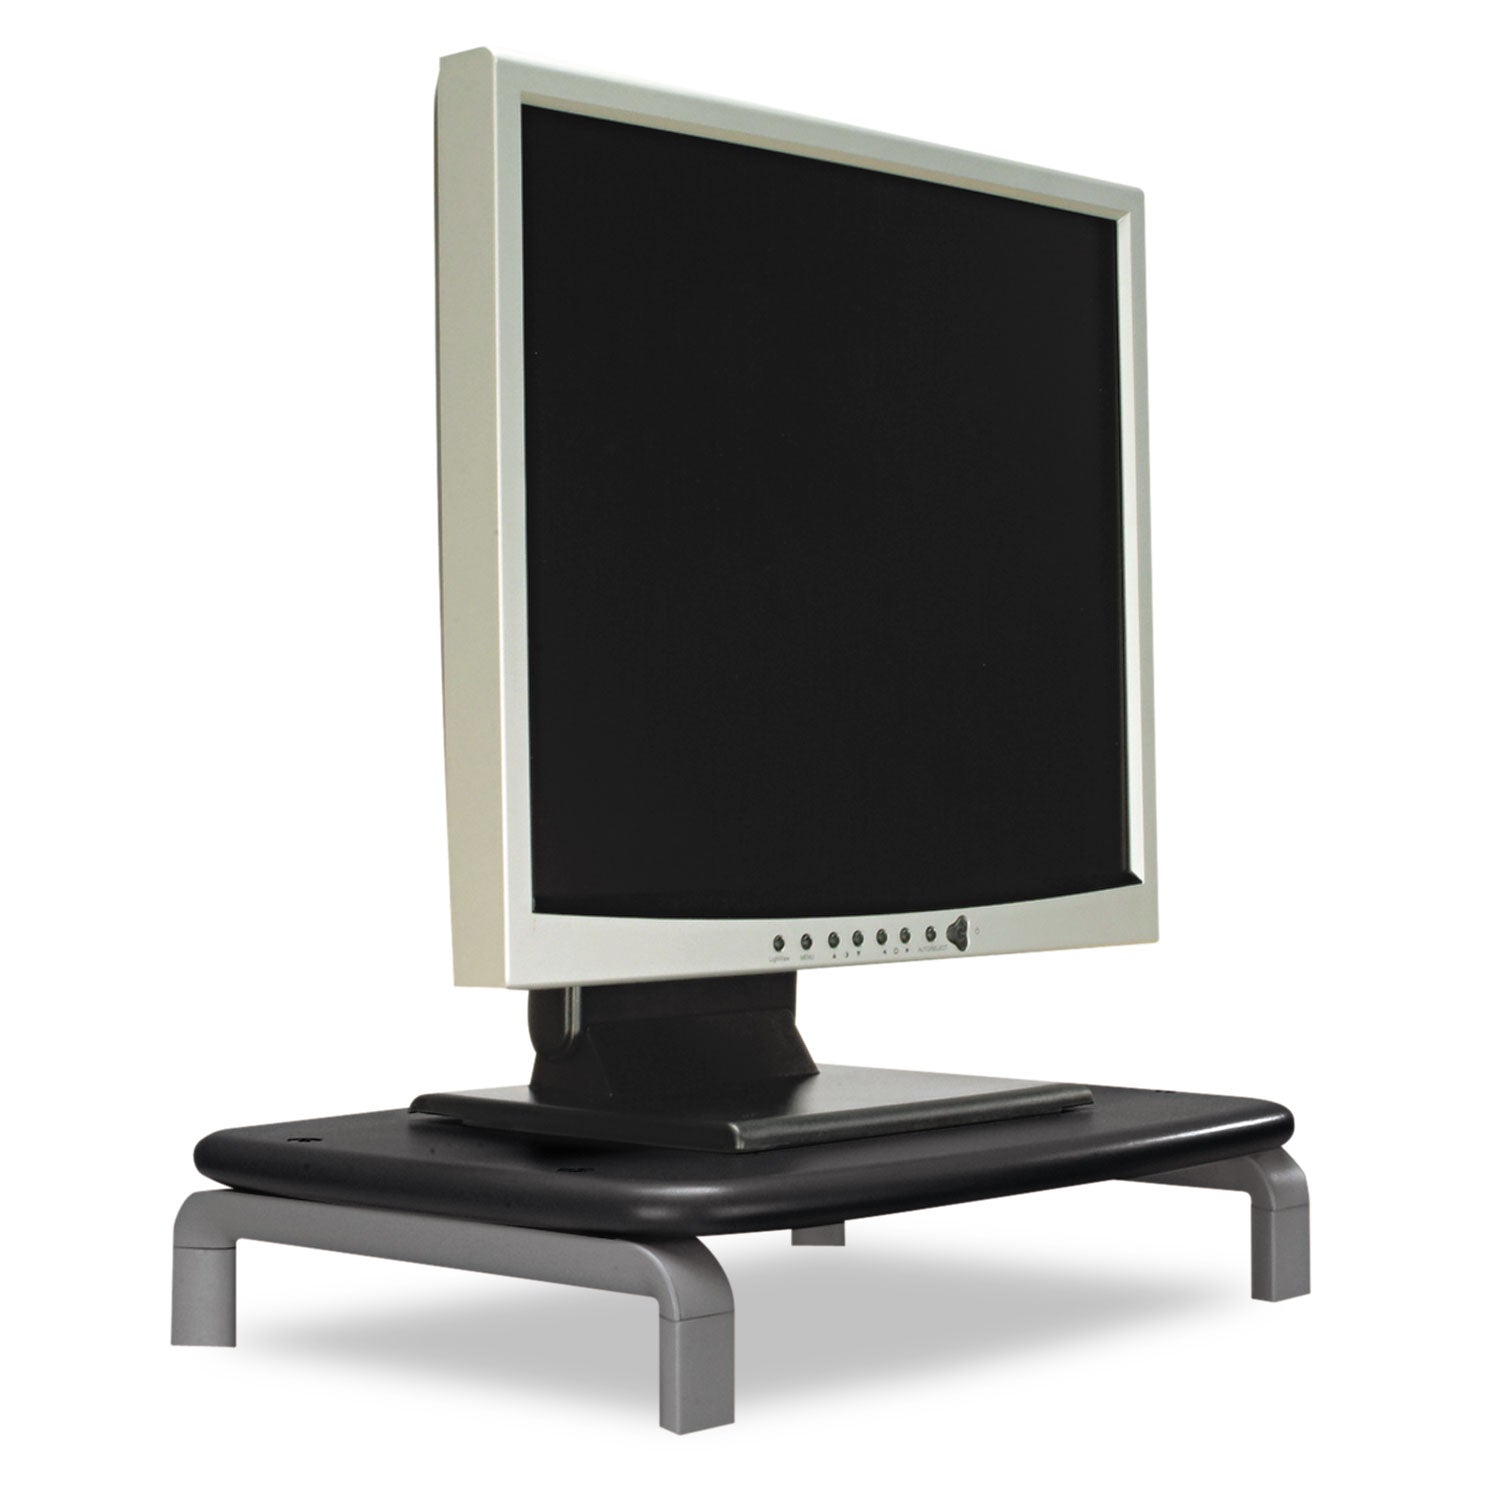 Monitor Stand with SmartFit, For 21" Monitors, 11.5" x 9" x 3", Black/Gray, Supports 80 lbs - 